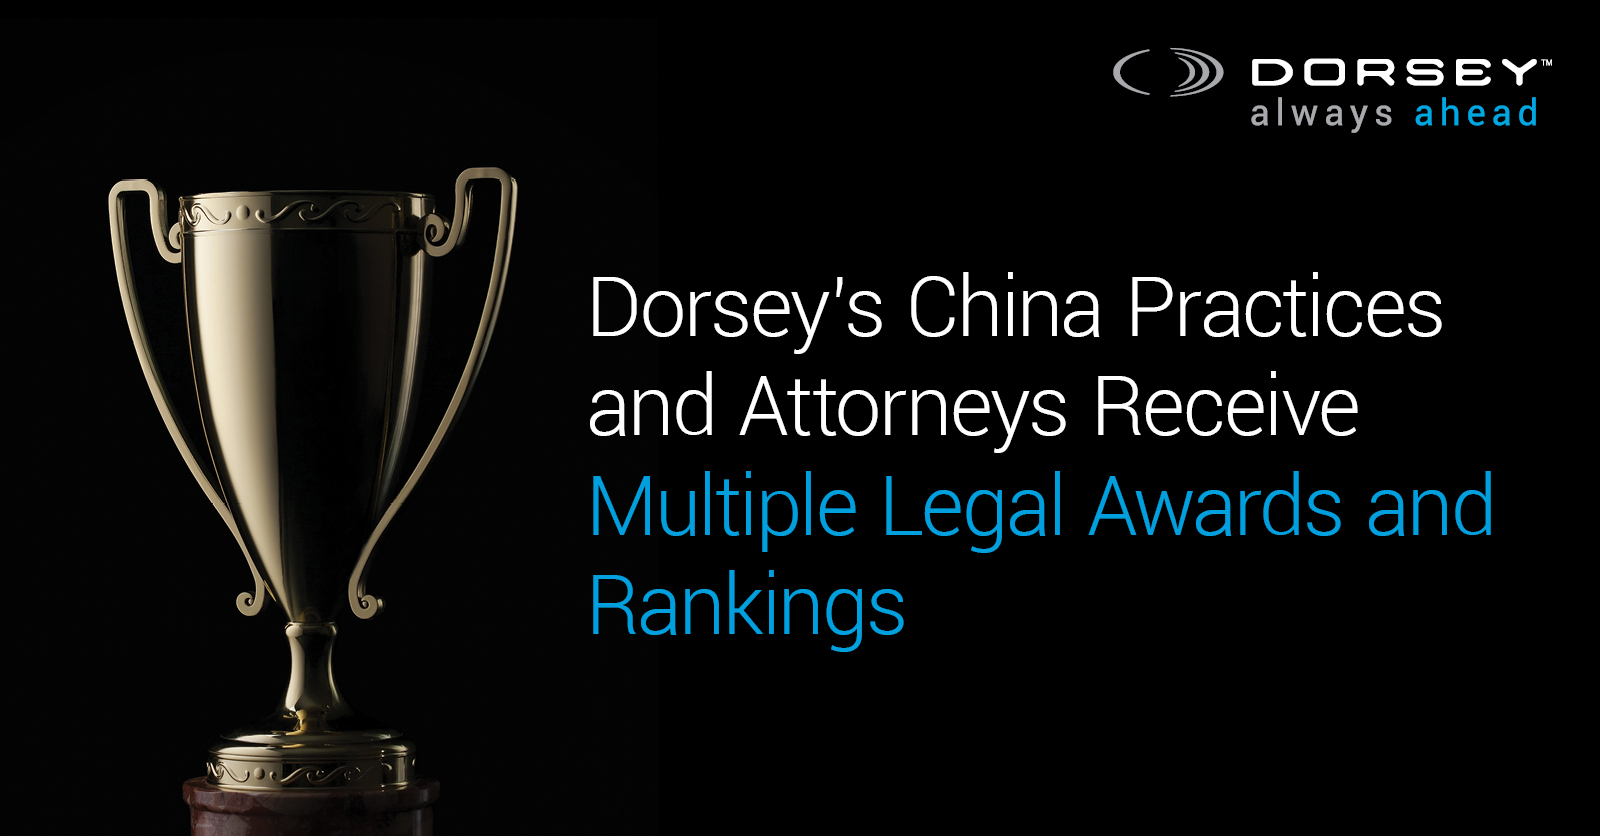 China Attorneys and Practices Receive Awards